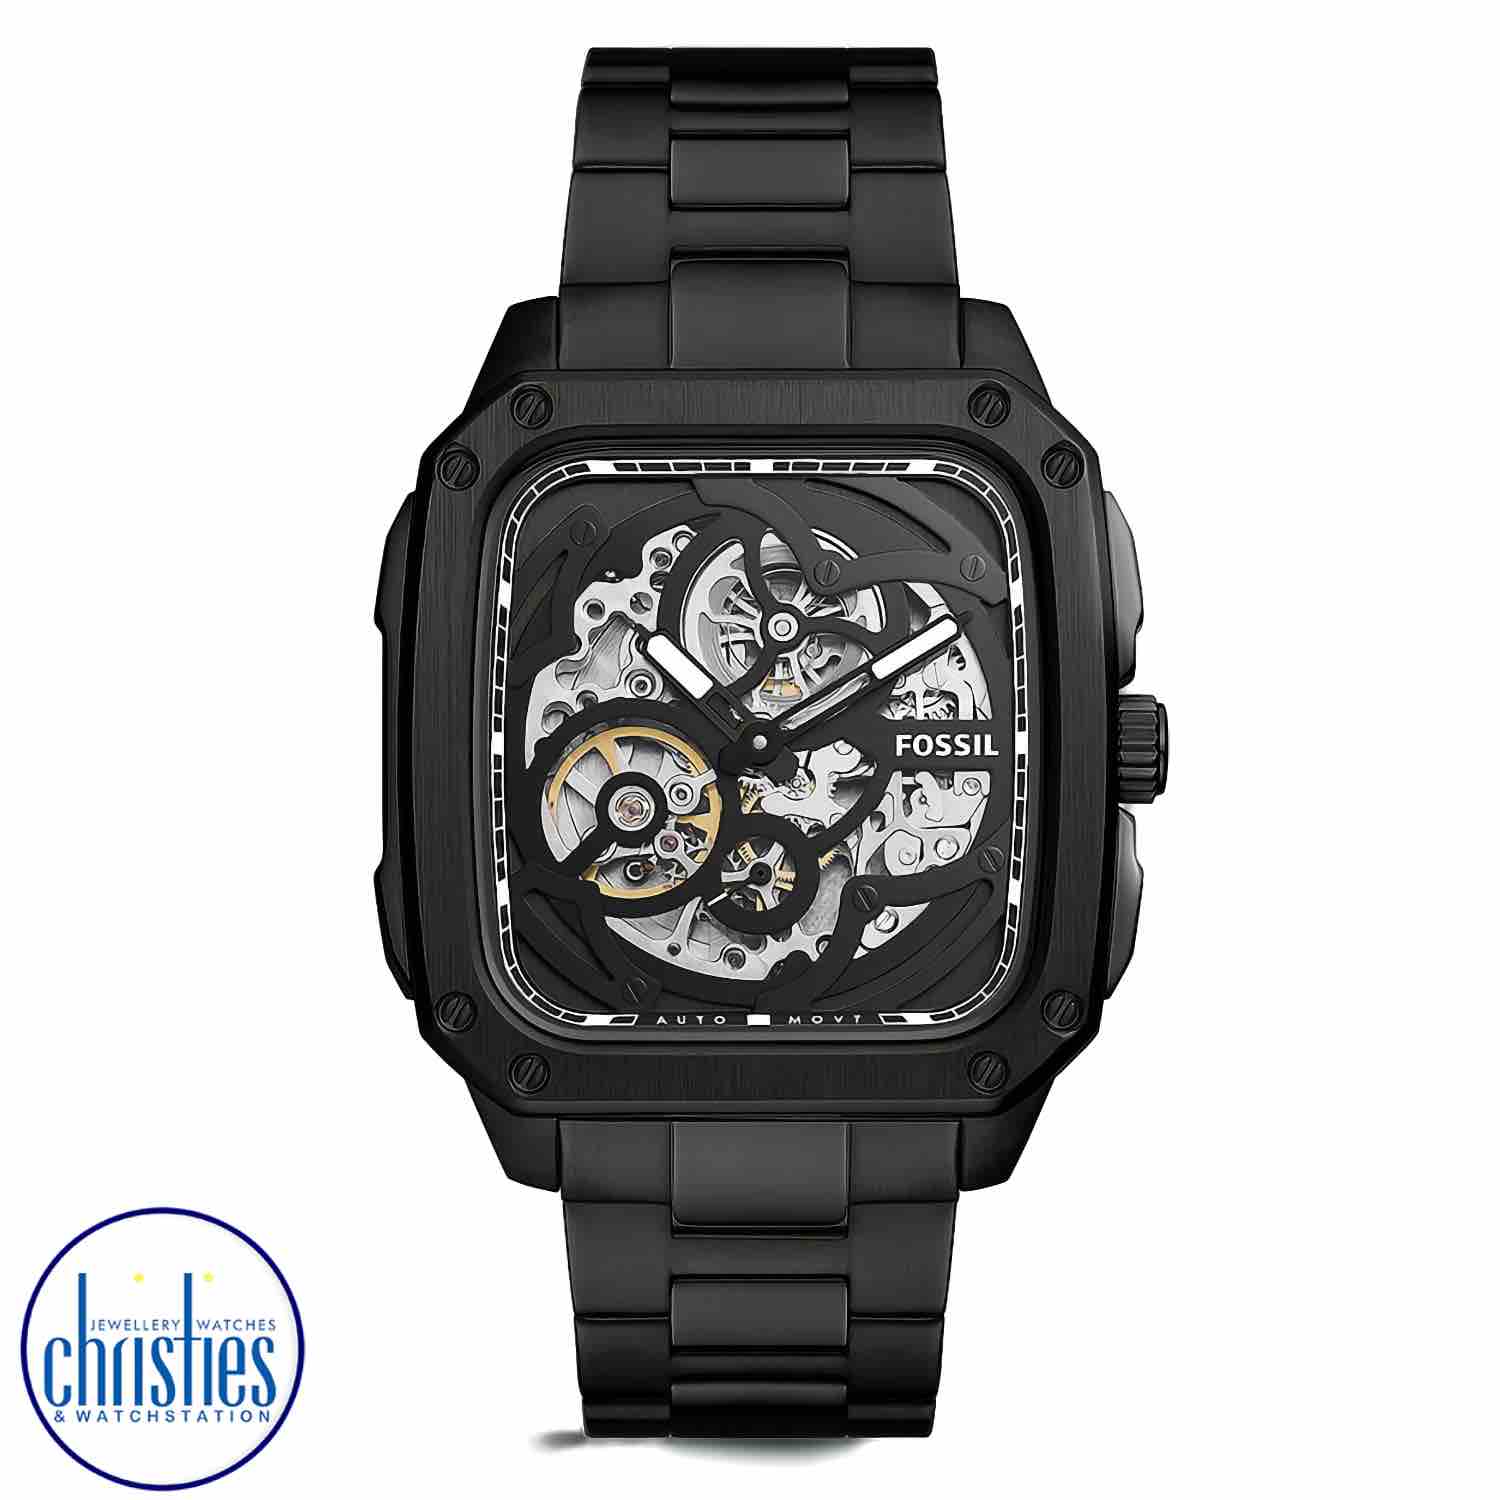 ME3203 Fossil Inscription Automatic Smoke Stainless Steel Watch. ME3203 Fossil Inscription Automatic Smoke Stainless Steel WatchAfterpay - Split your purchase into 4 instalments - Pay for your purchase over 4 instalments, due every two weeks. fossil mens 